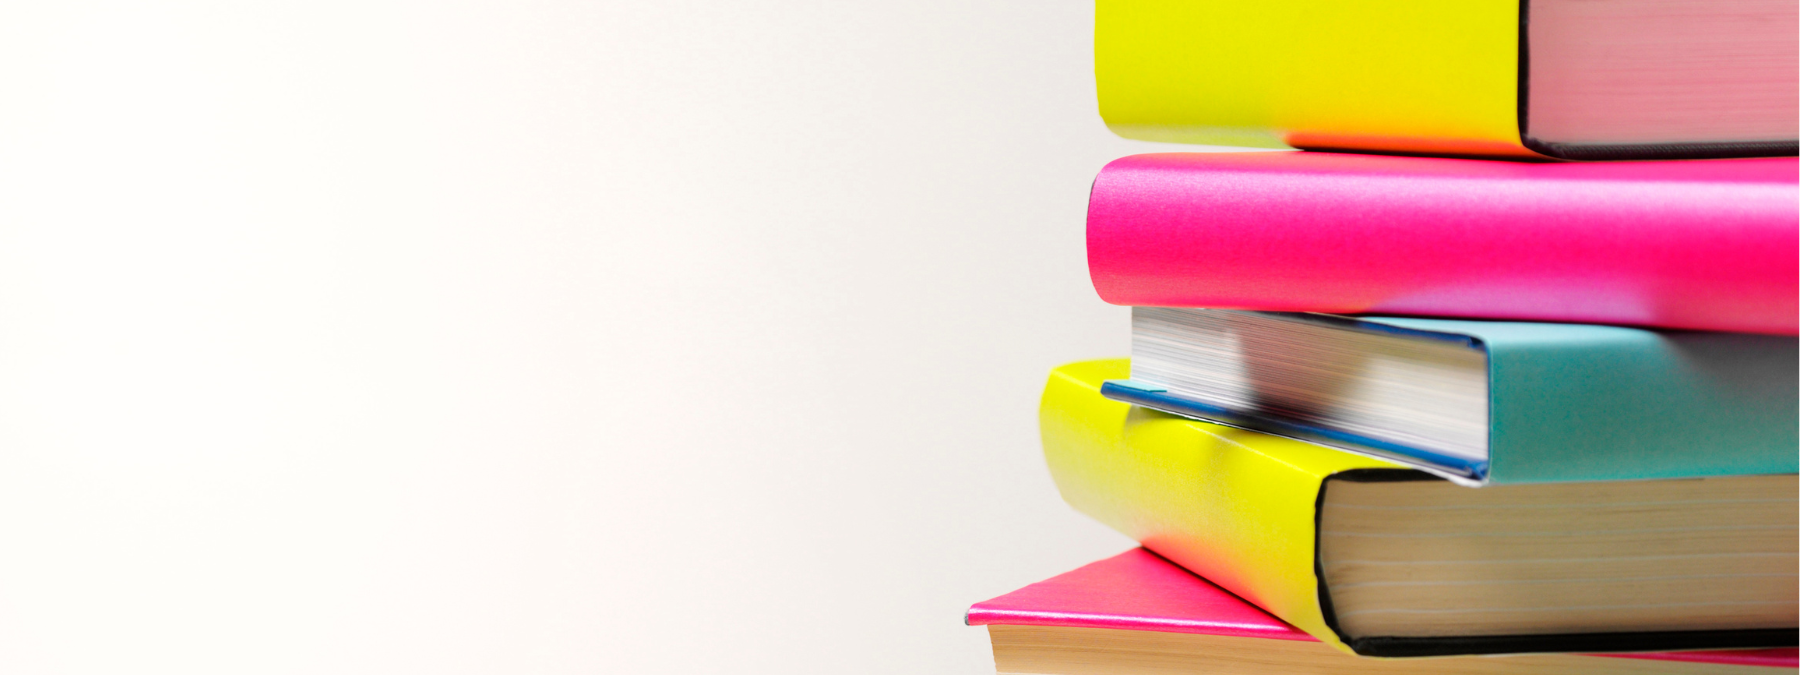 White background with a stack of bright yellow, pink, and teal books on the right side.